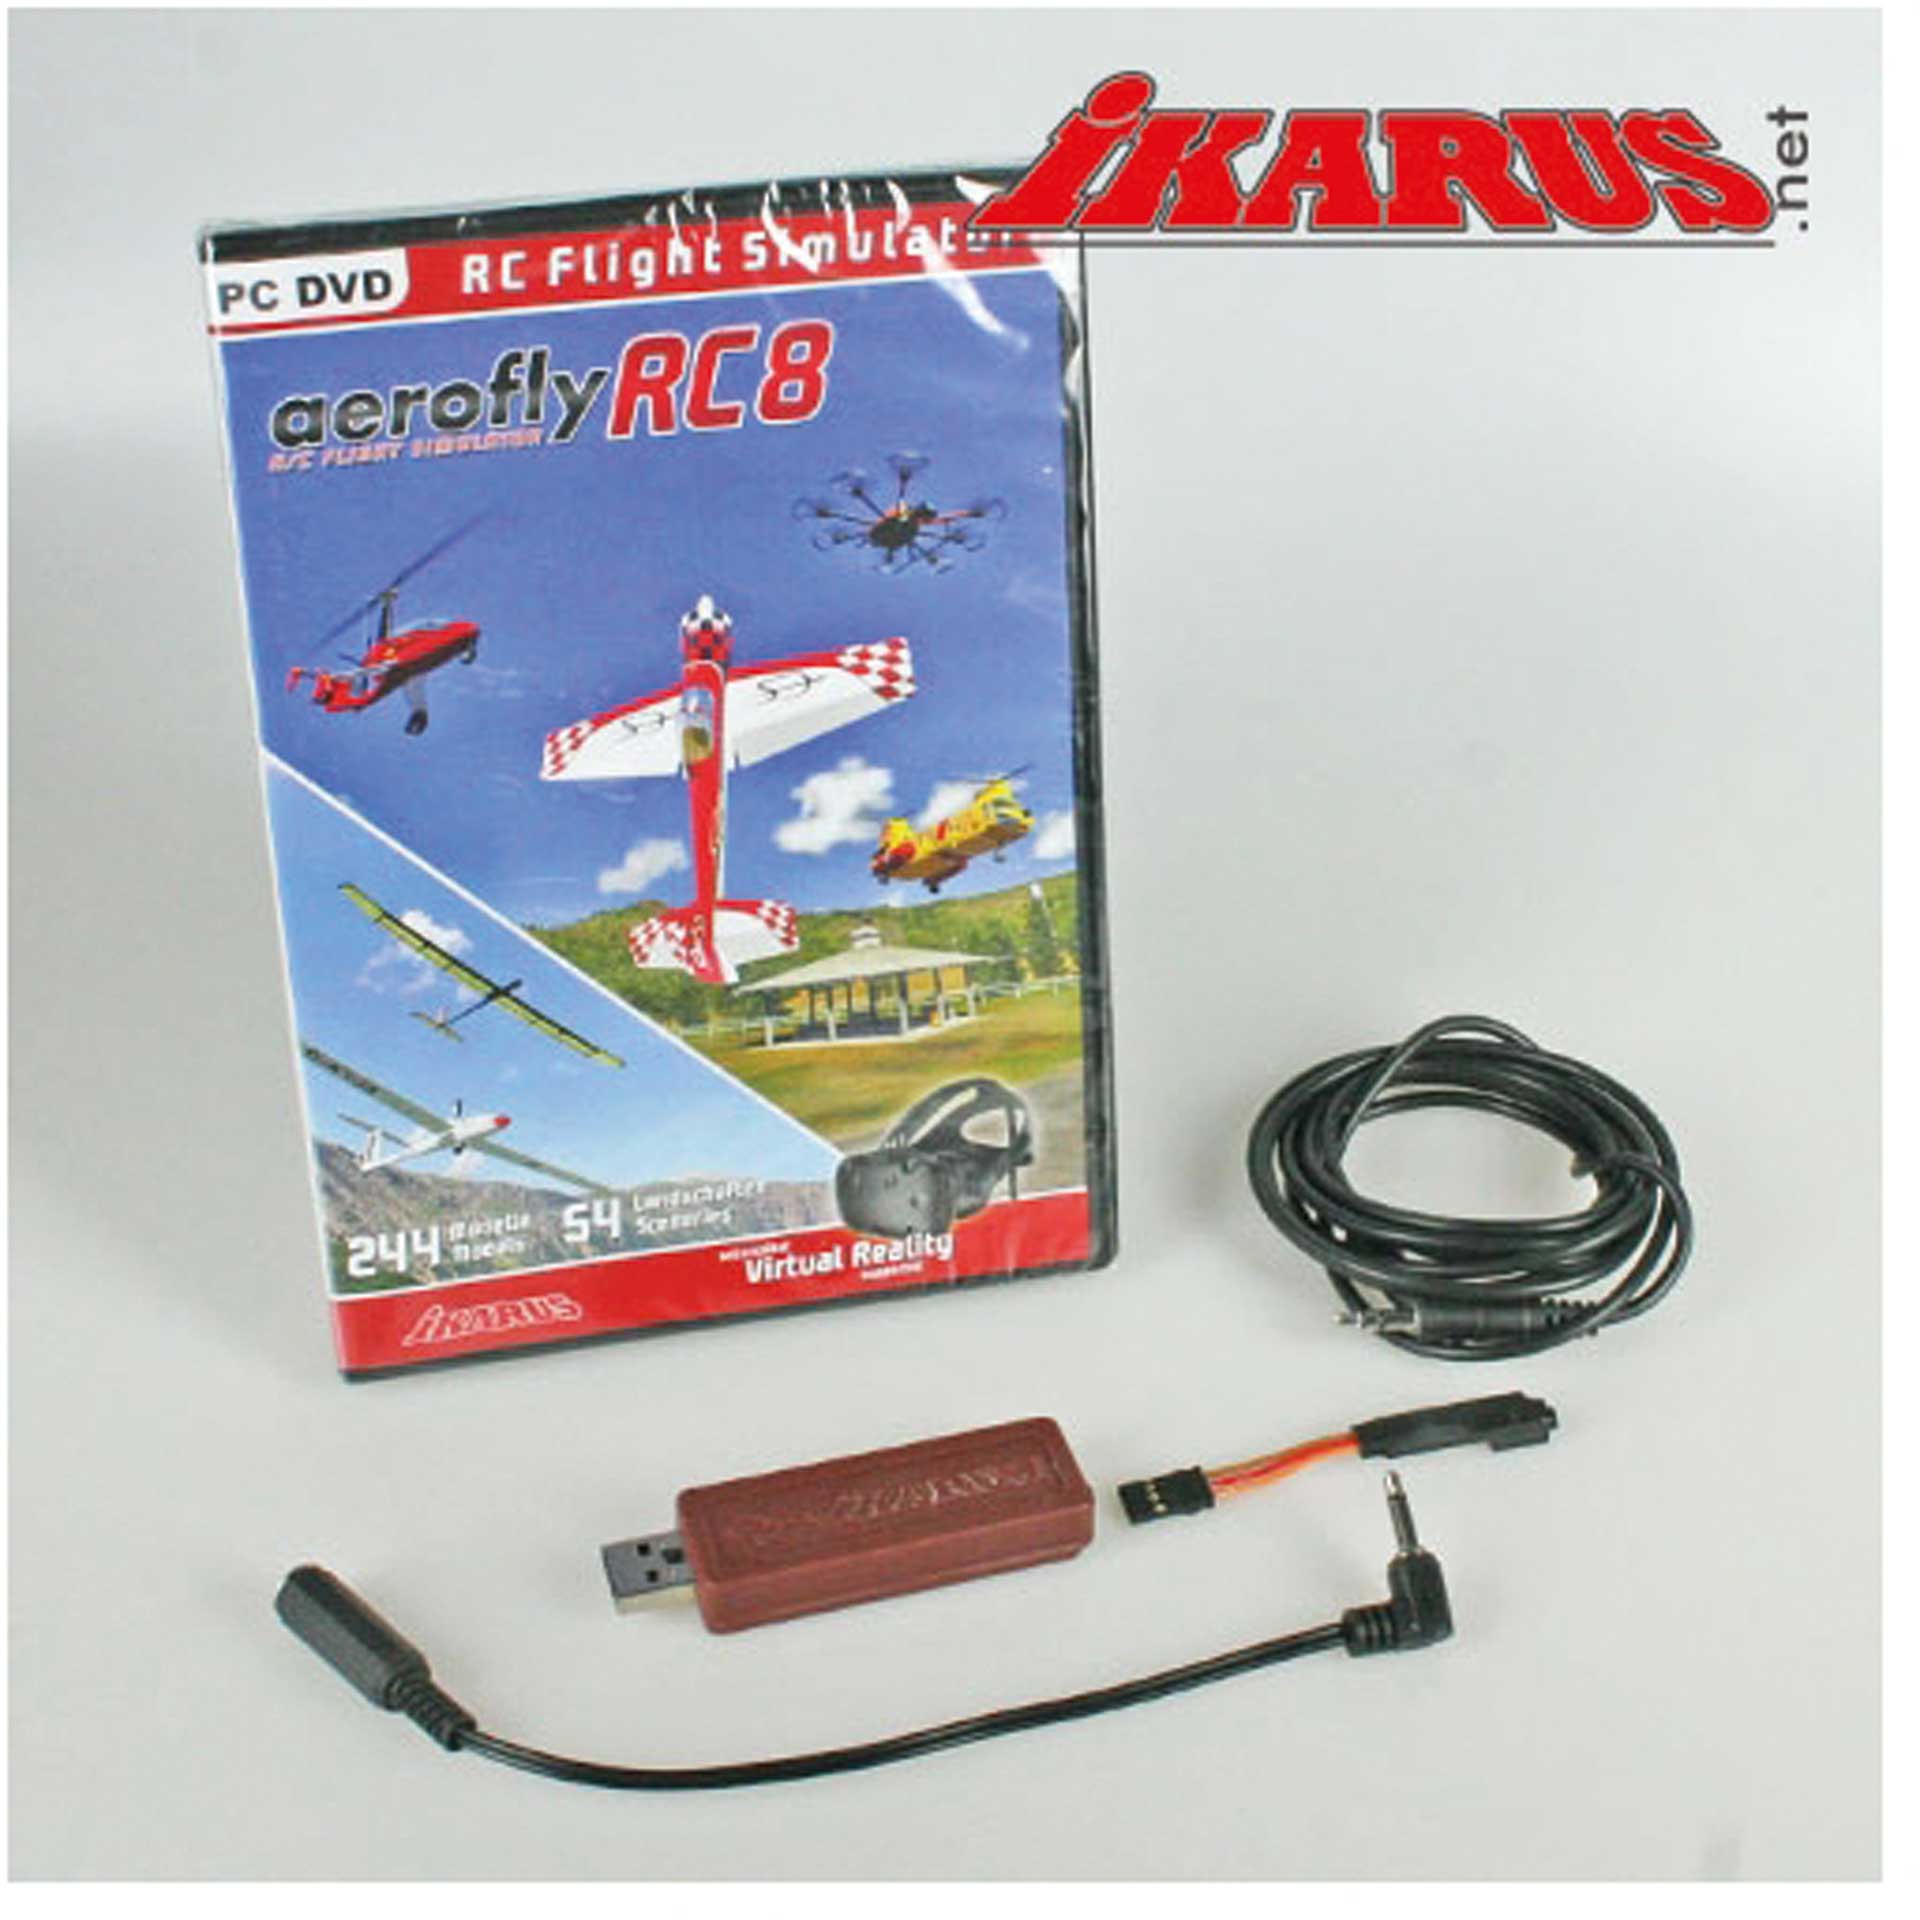 IKARUS AEROFLY RC8 WITH INTERFACE FOR SPECTRUM